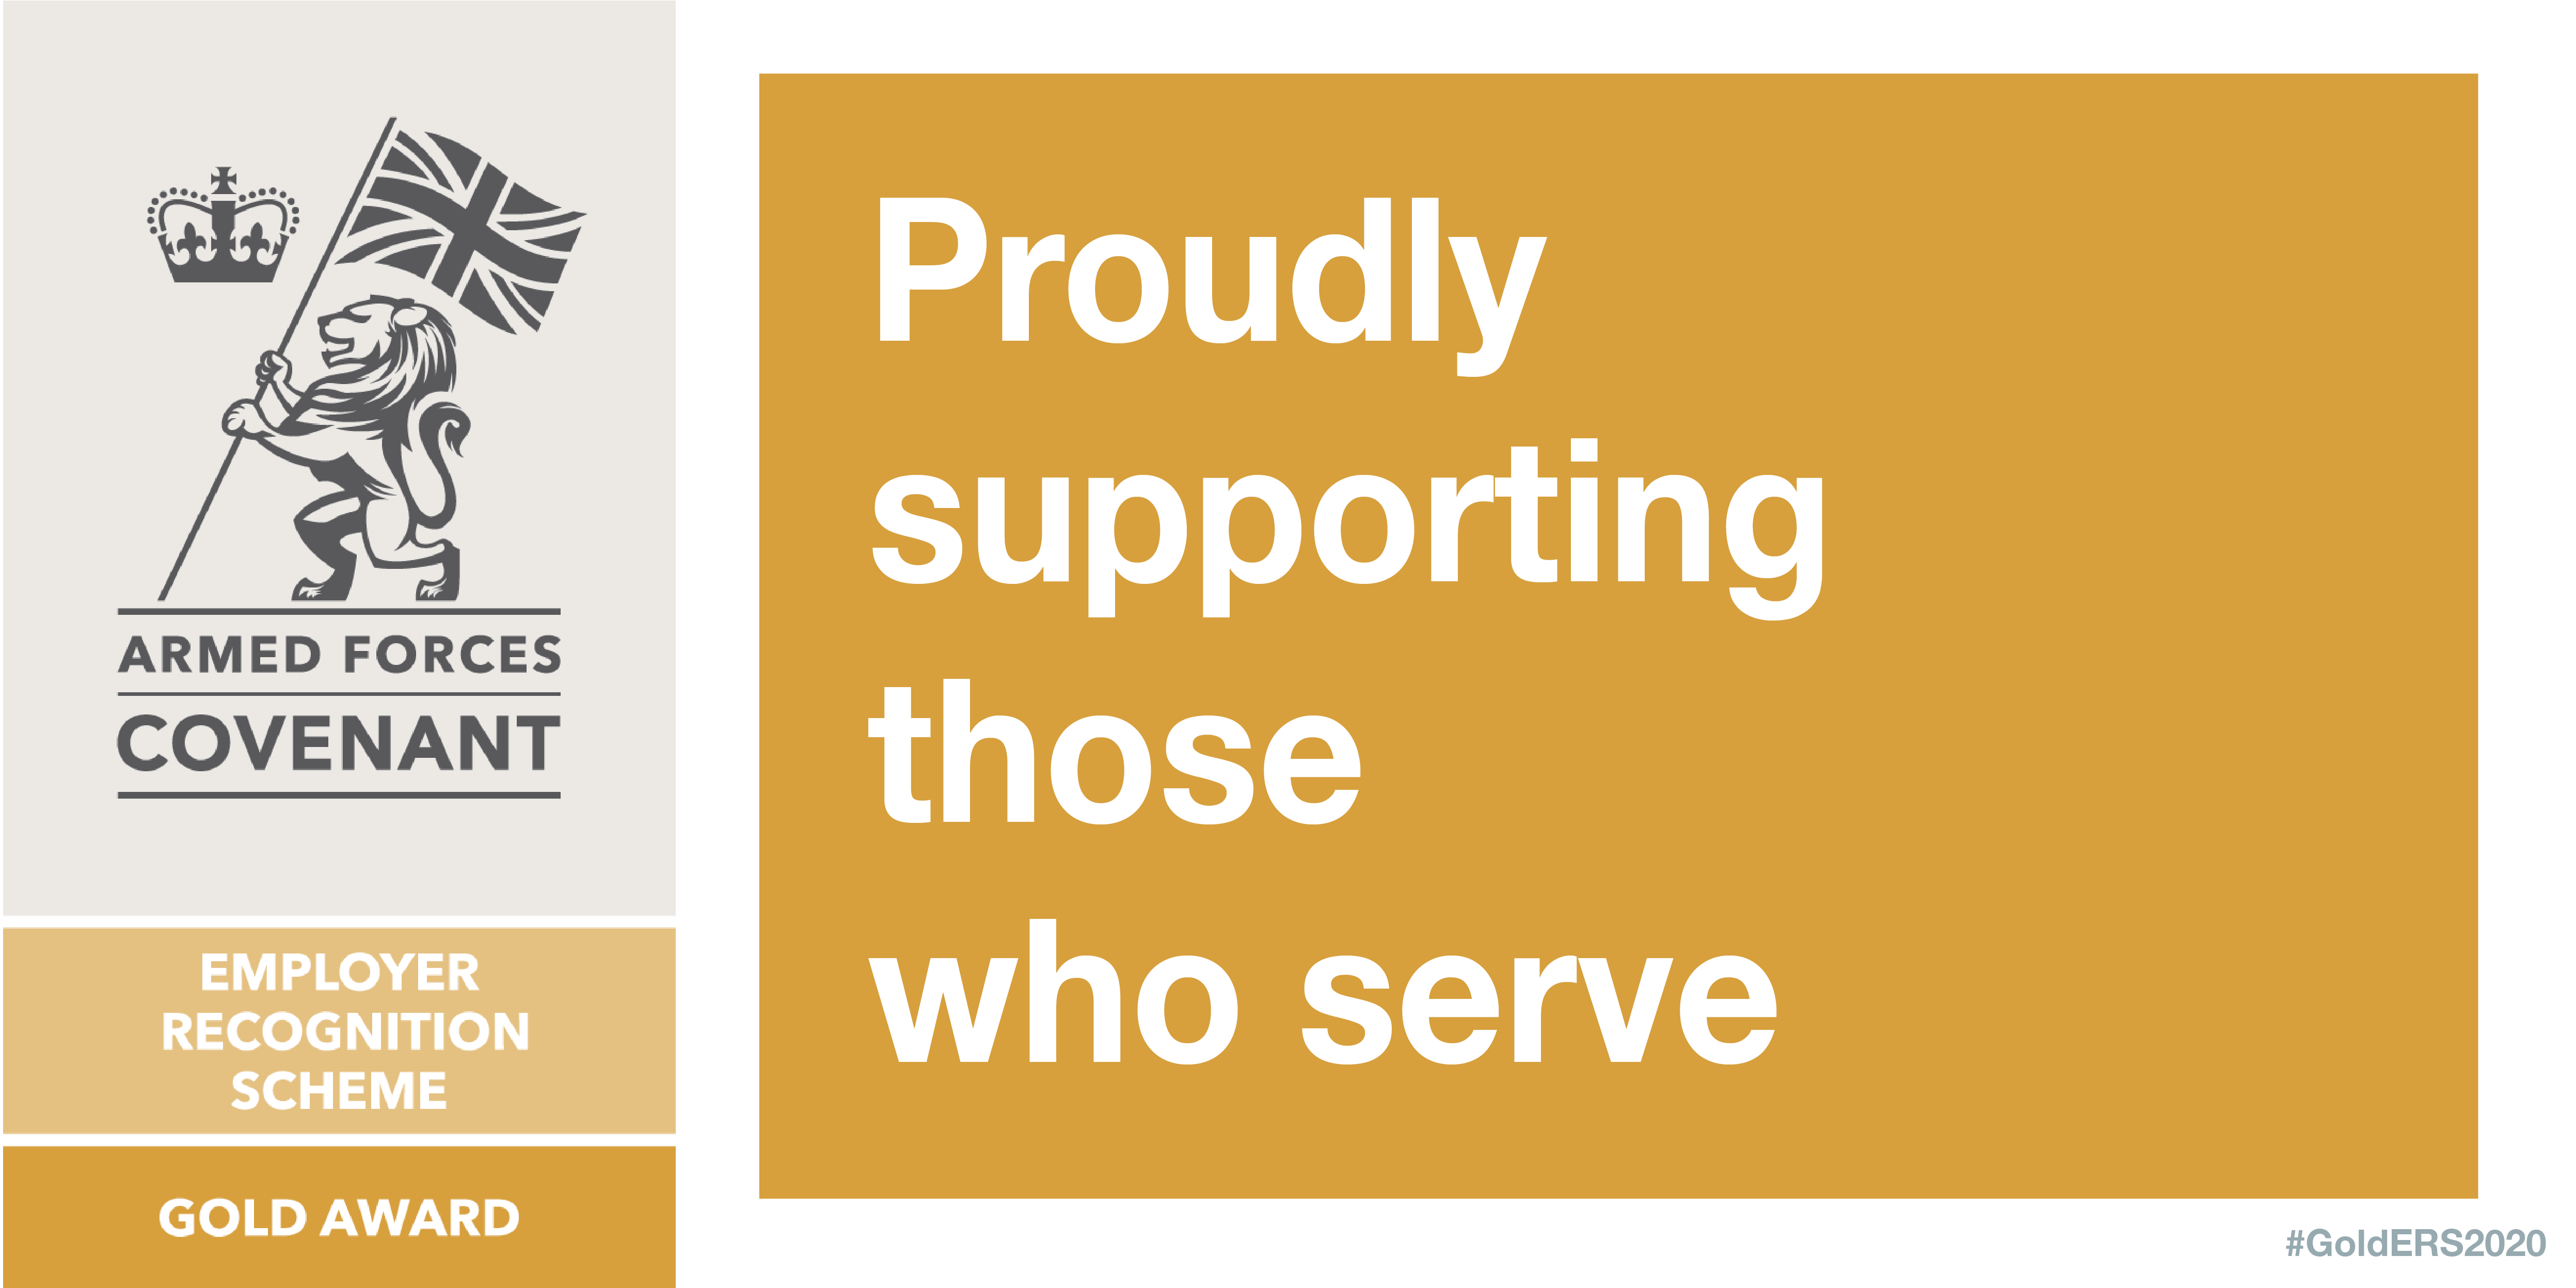 Armed forces covenant employer recognition scheme gold award logo